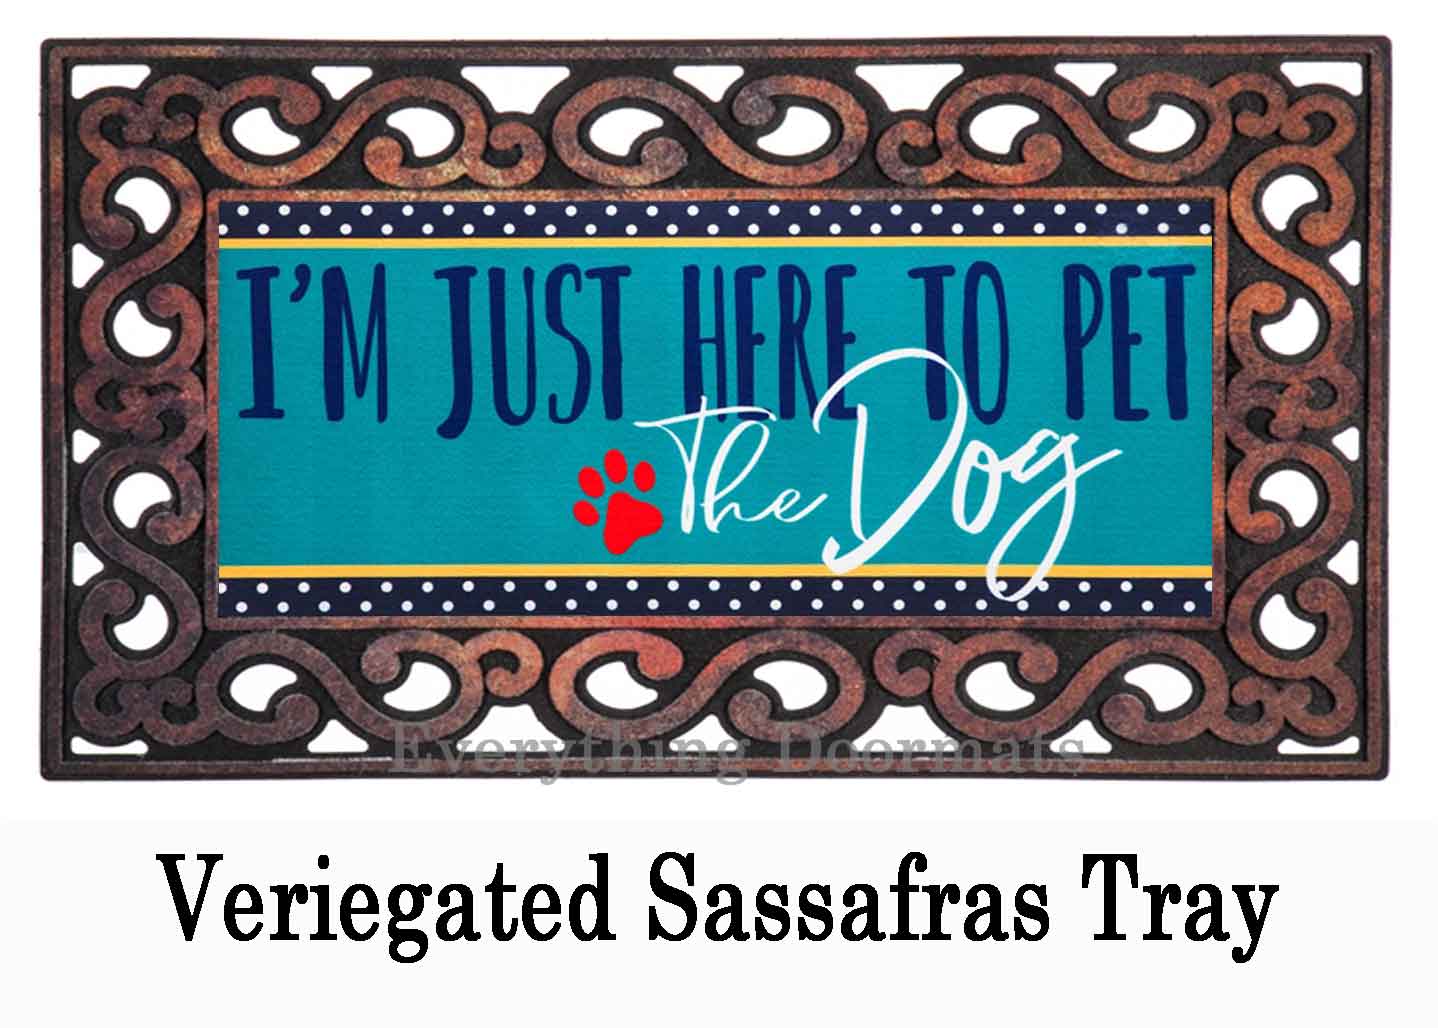 https://www.everythingdoormats.com/images/products/her-to-pet-the-dog-sassafras-switch-insert-doormat-in-variegated-rubber-tray.jpg